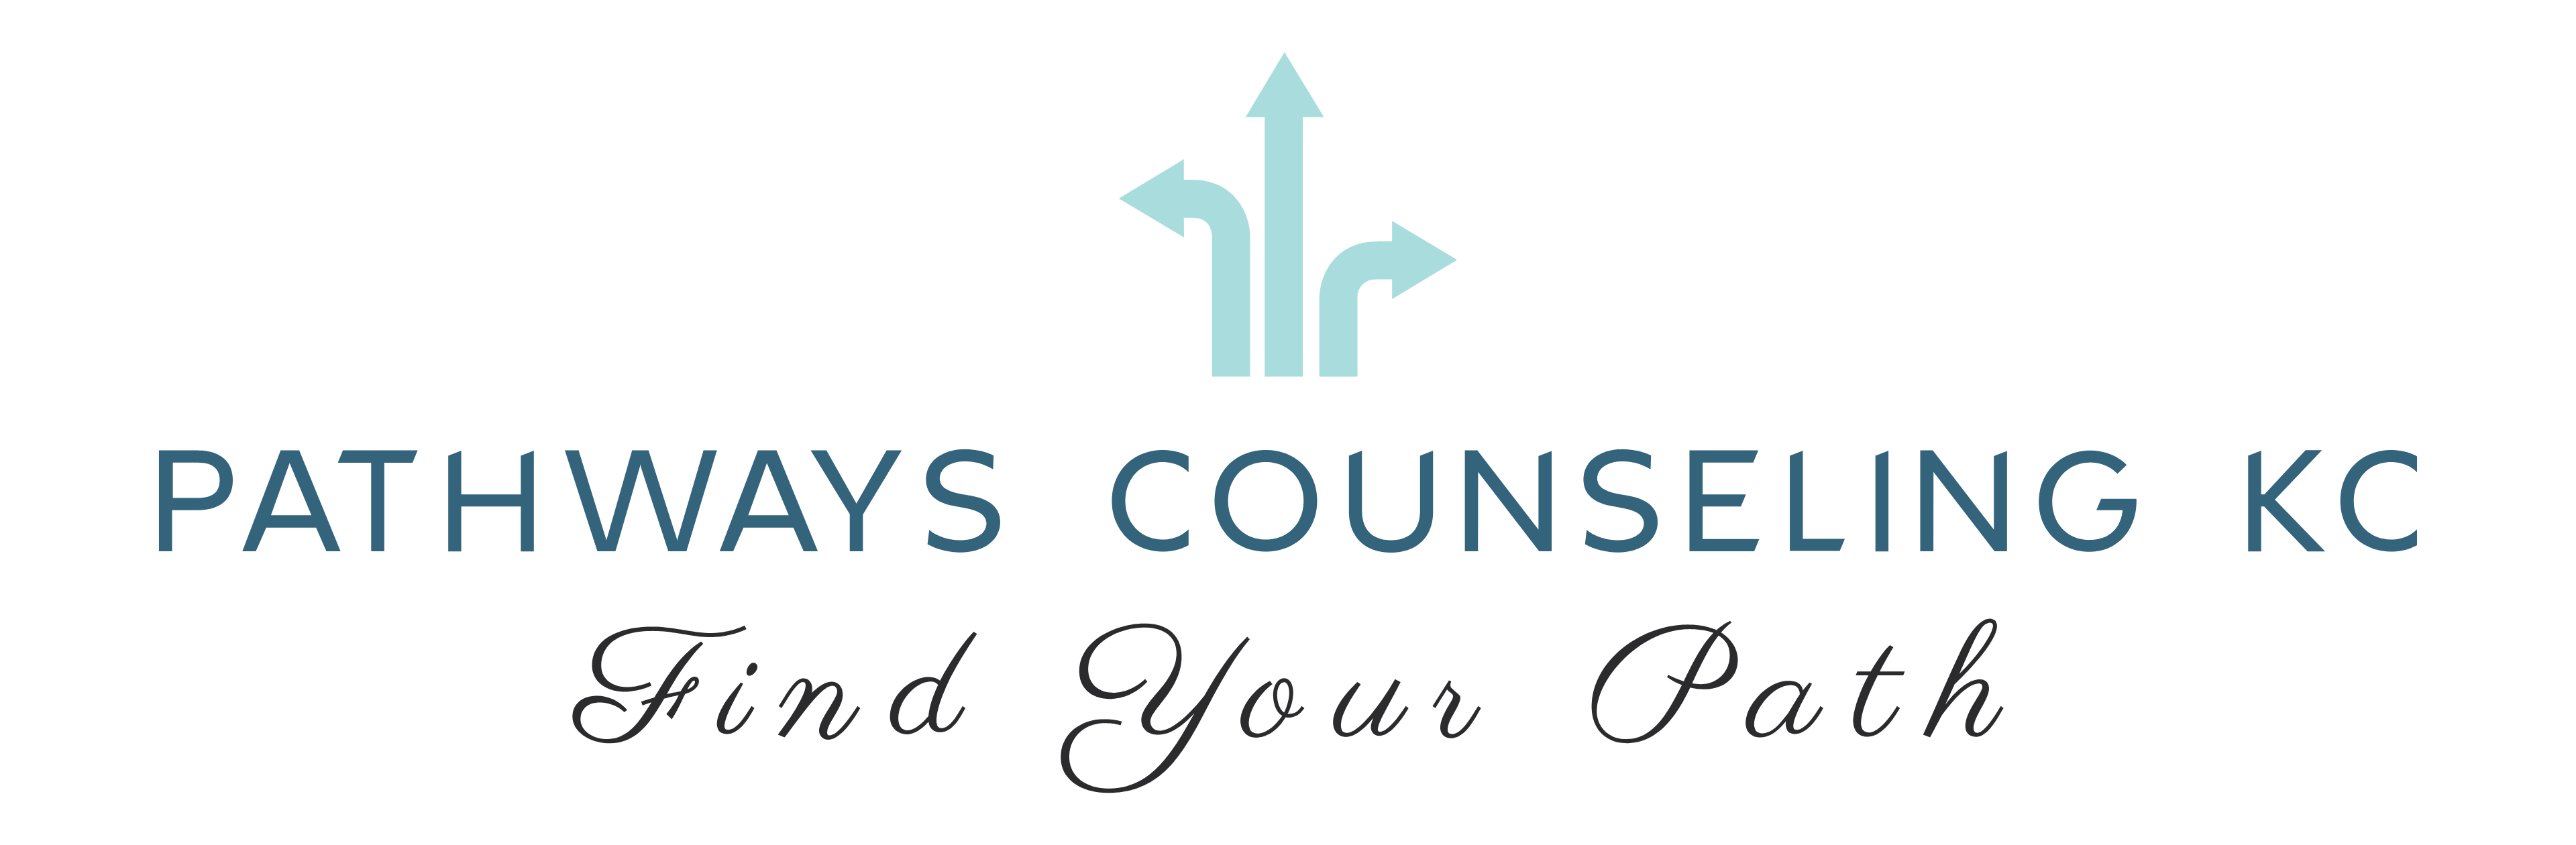 Pathways Counseling KC Logo. Image links to home page.